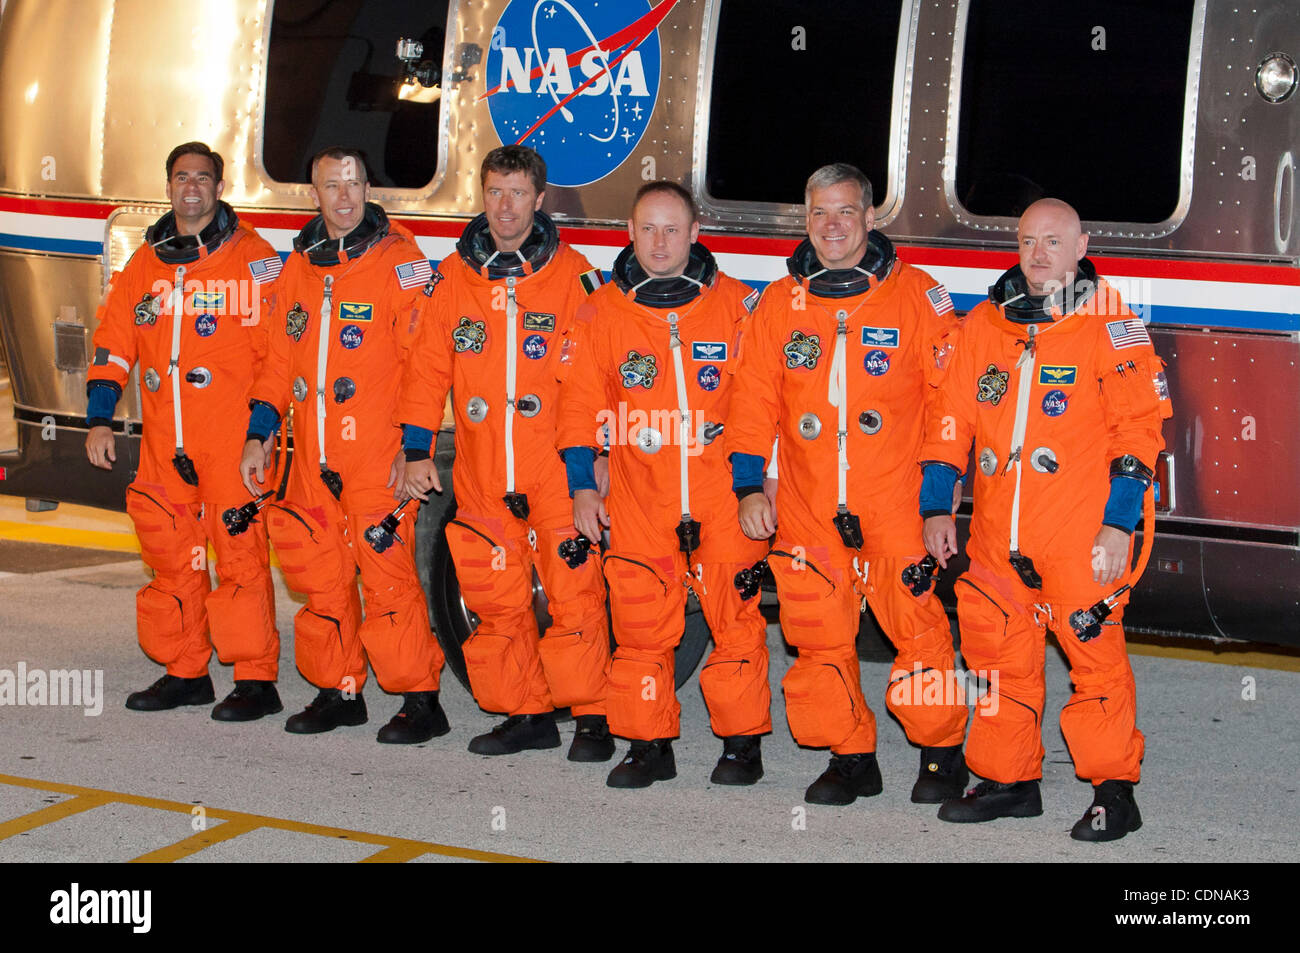 May 16, 2011 - Cape Canaveral, Florida, U.S. - Space Shuttle Endeavour STS-134 Astronauts, L-R, Canadian born U.S. astronaut GREG CHAMITOFF, mission specialist DREW FEUSTEL, European Space Agency astronaut ROBERTO VITTORI, of Italy,, mission specialist MIKE FINCKE, British born U.S. astronaut, pilot Stock Photo